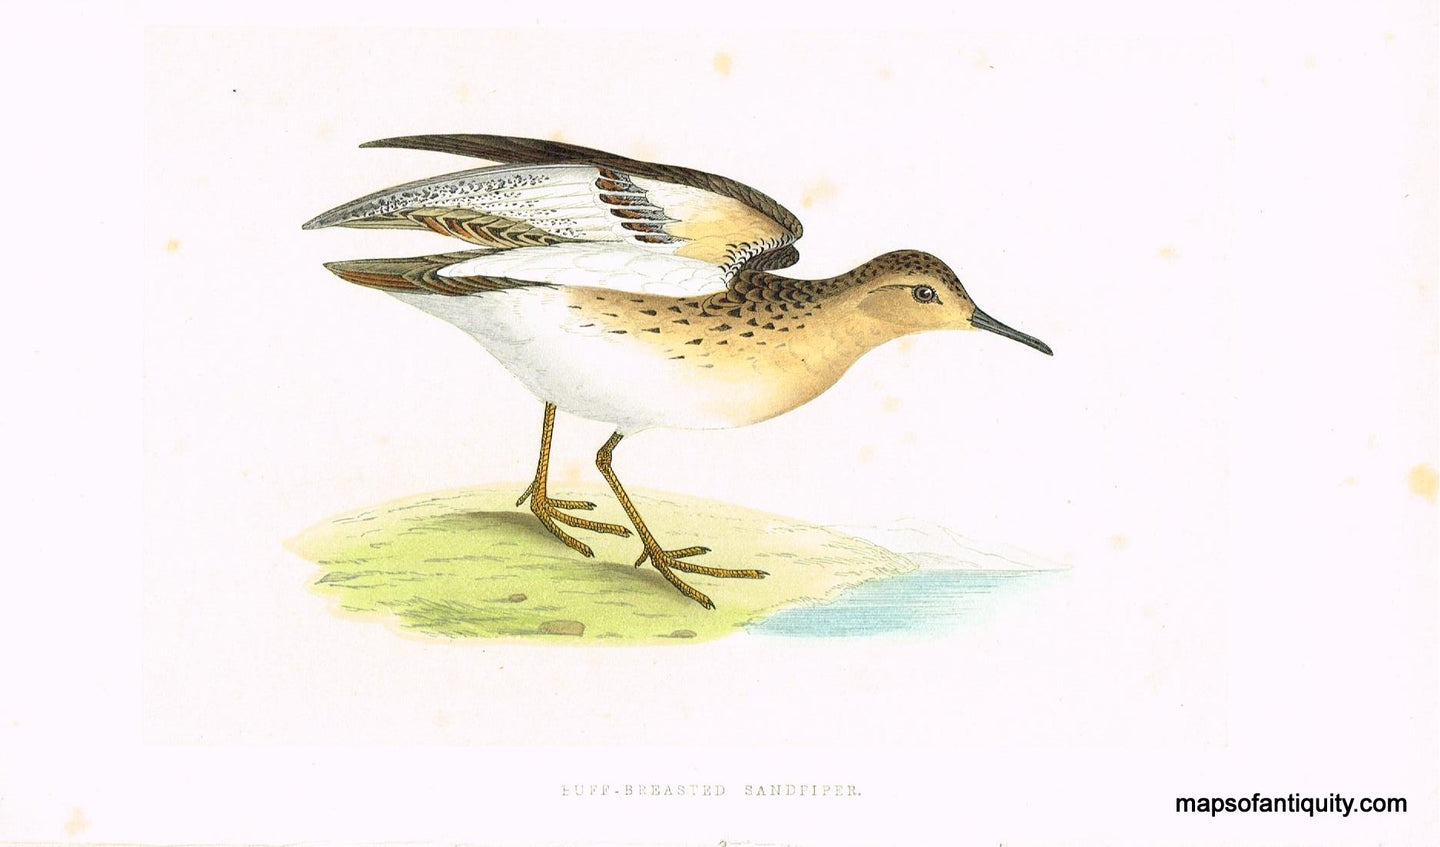 Antique-Hand-Colored-Engraved-Illustration-Buff-Breasted-Sandpiper-Morris-bird-Natural-History-Birds-1851-Morris-Maps-Of-Antiquity